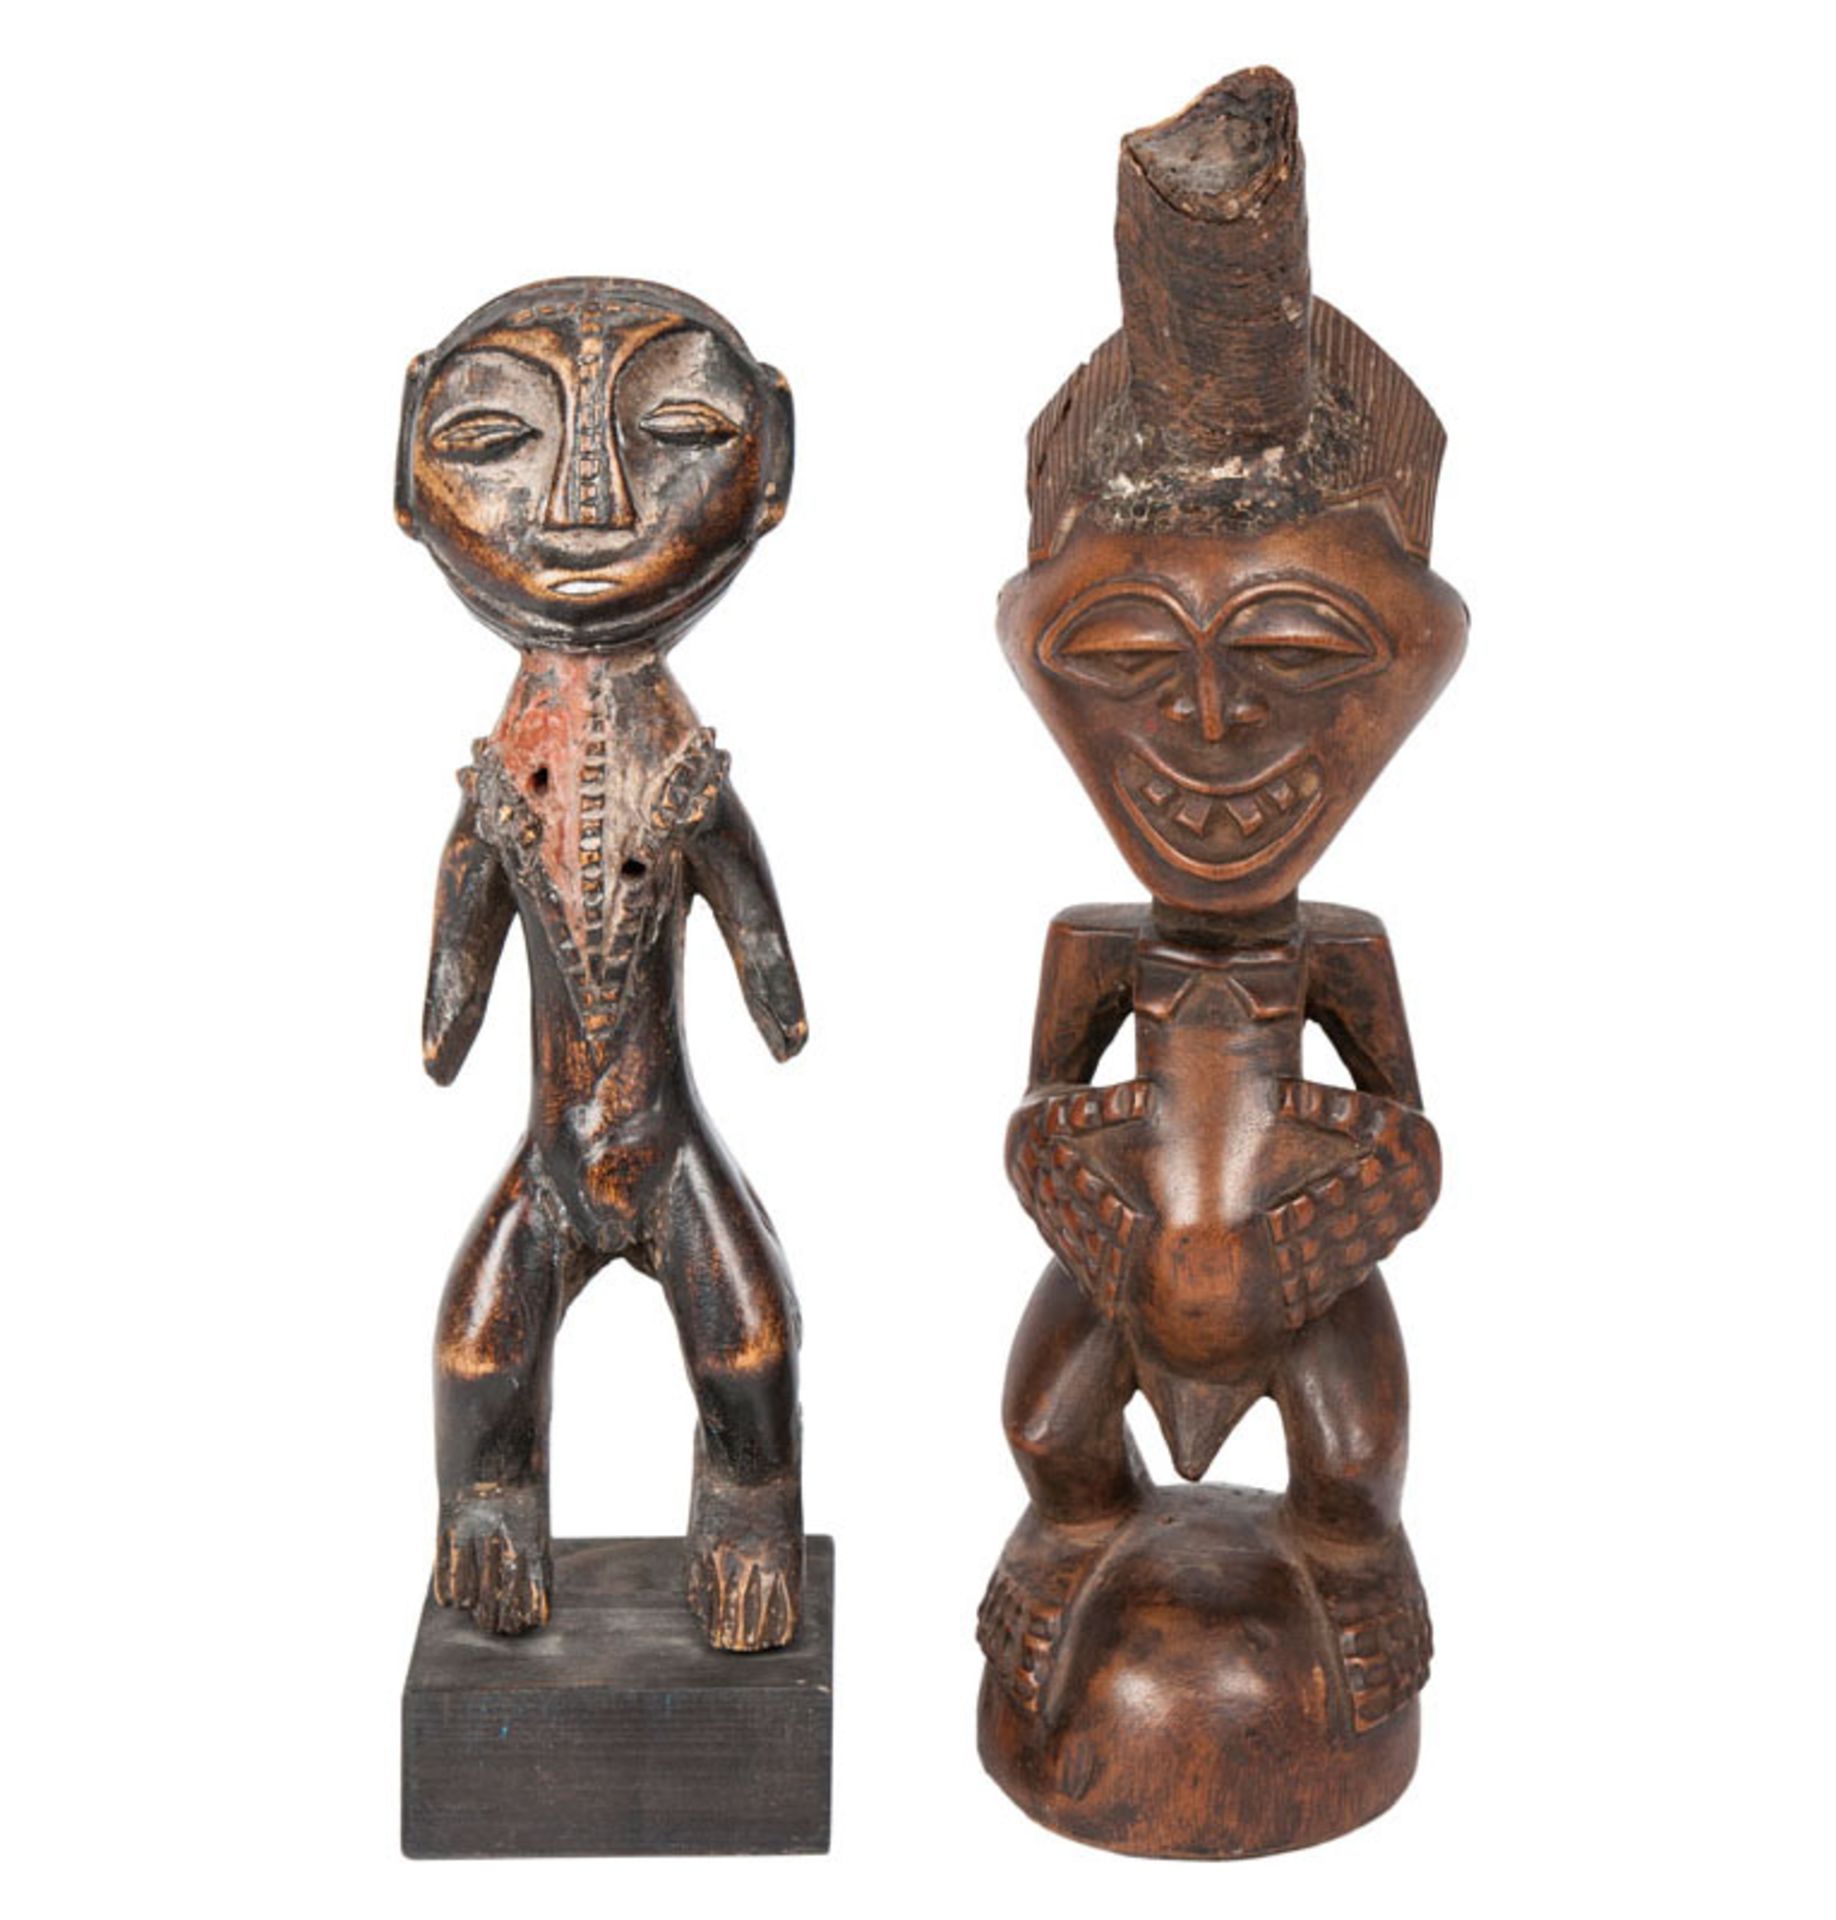 Two magic african figures West Africa. Carved wood, partially black coloured, traces of polychrome